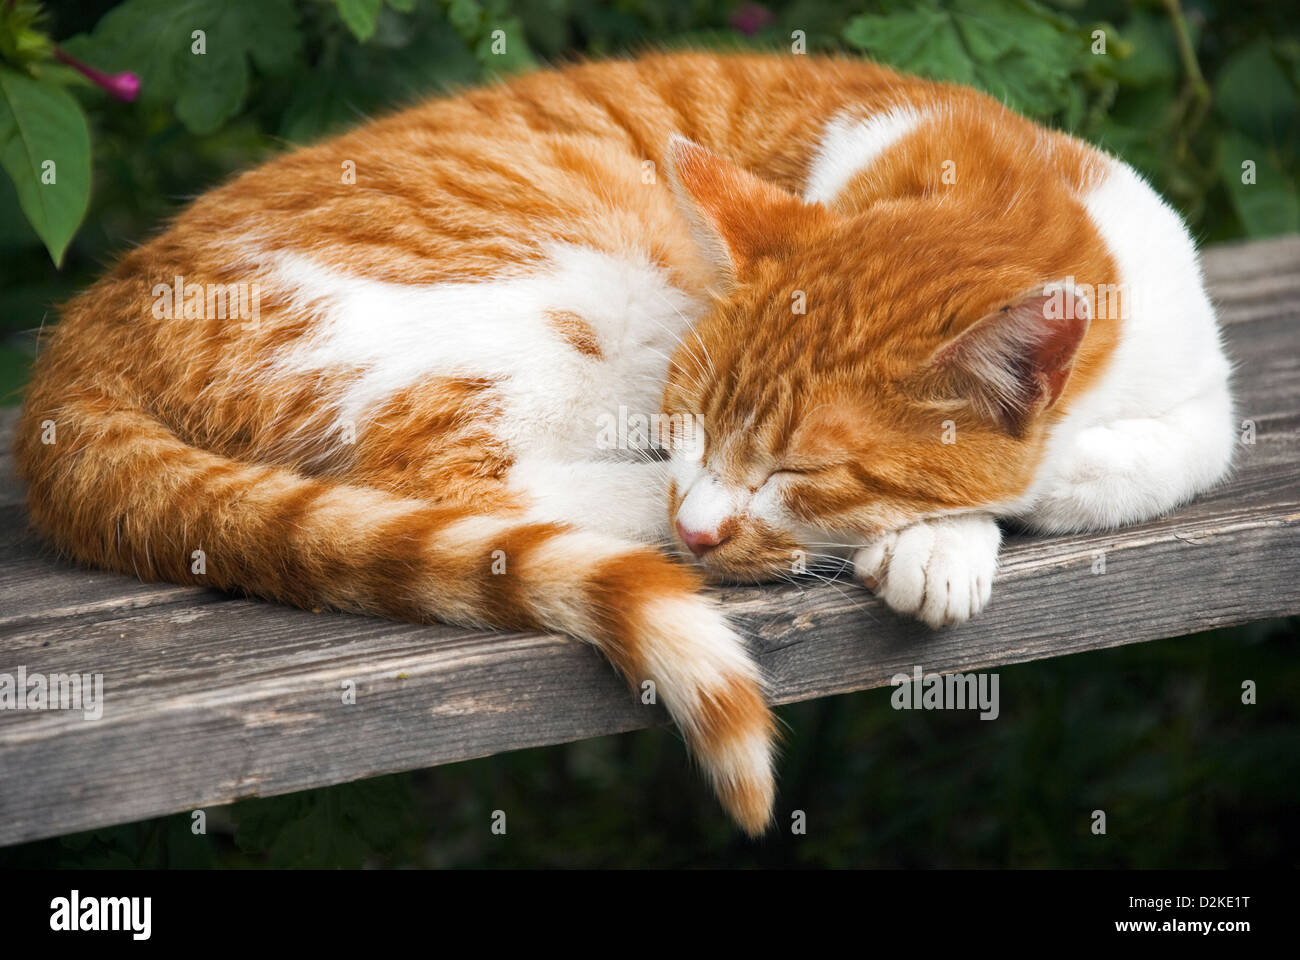 Ginger and white cat sleeping on wooden bench Stock Photo